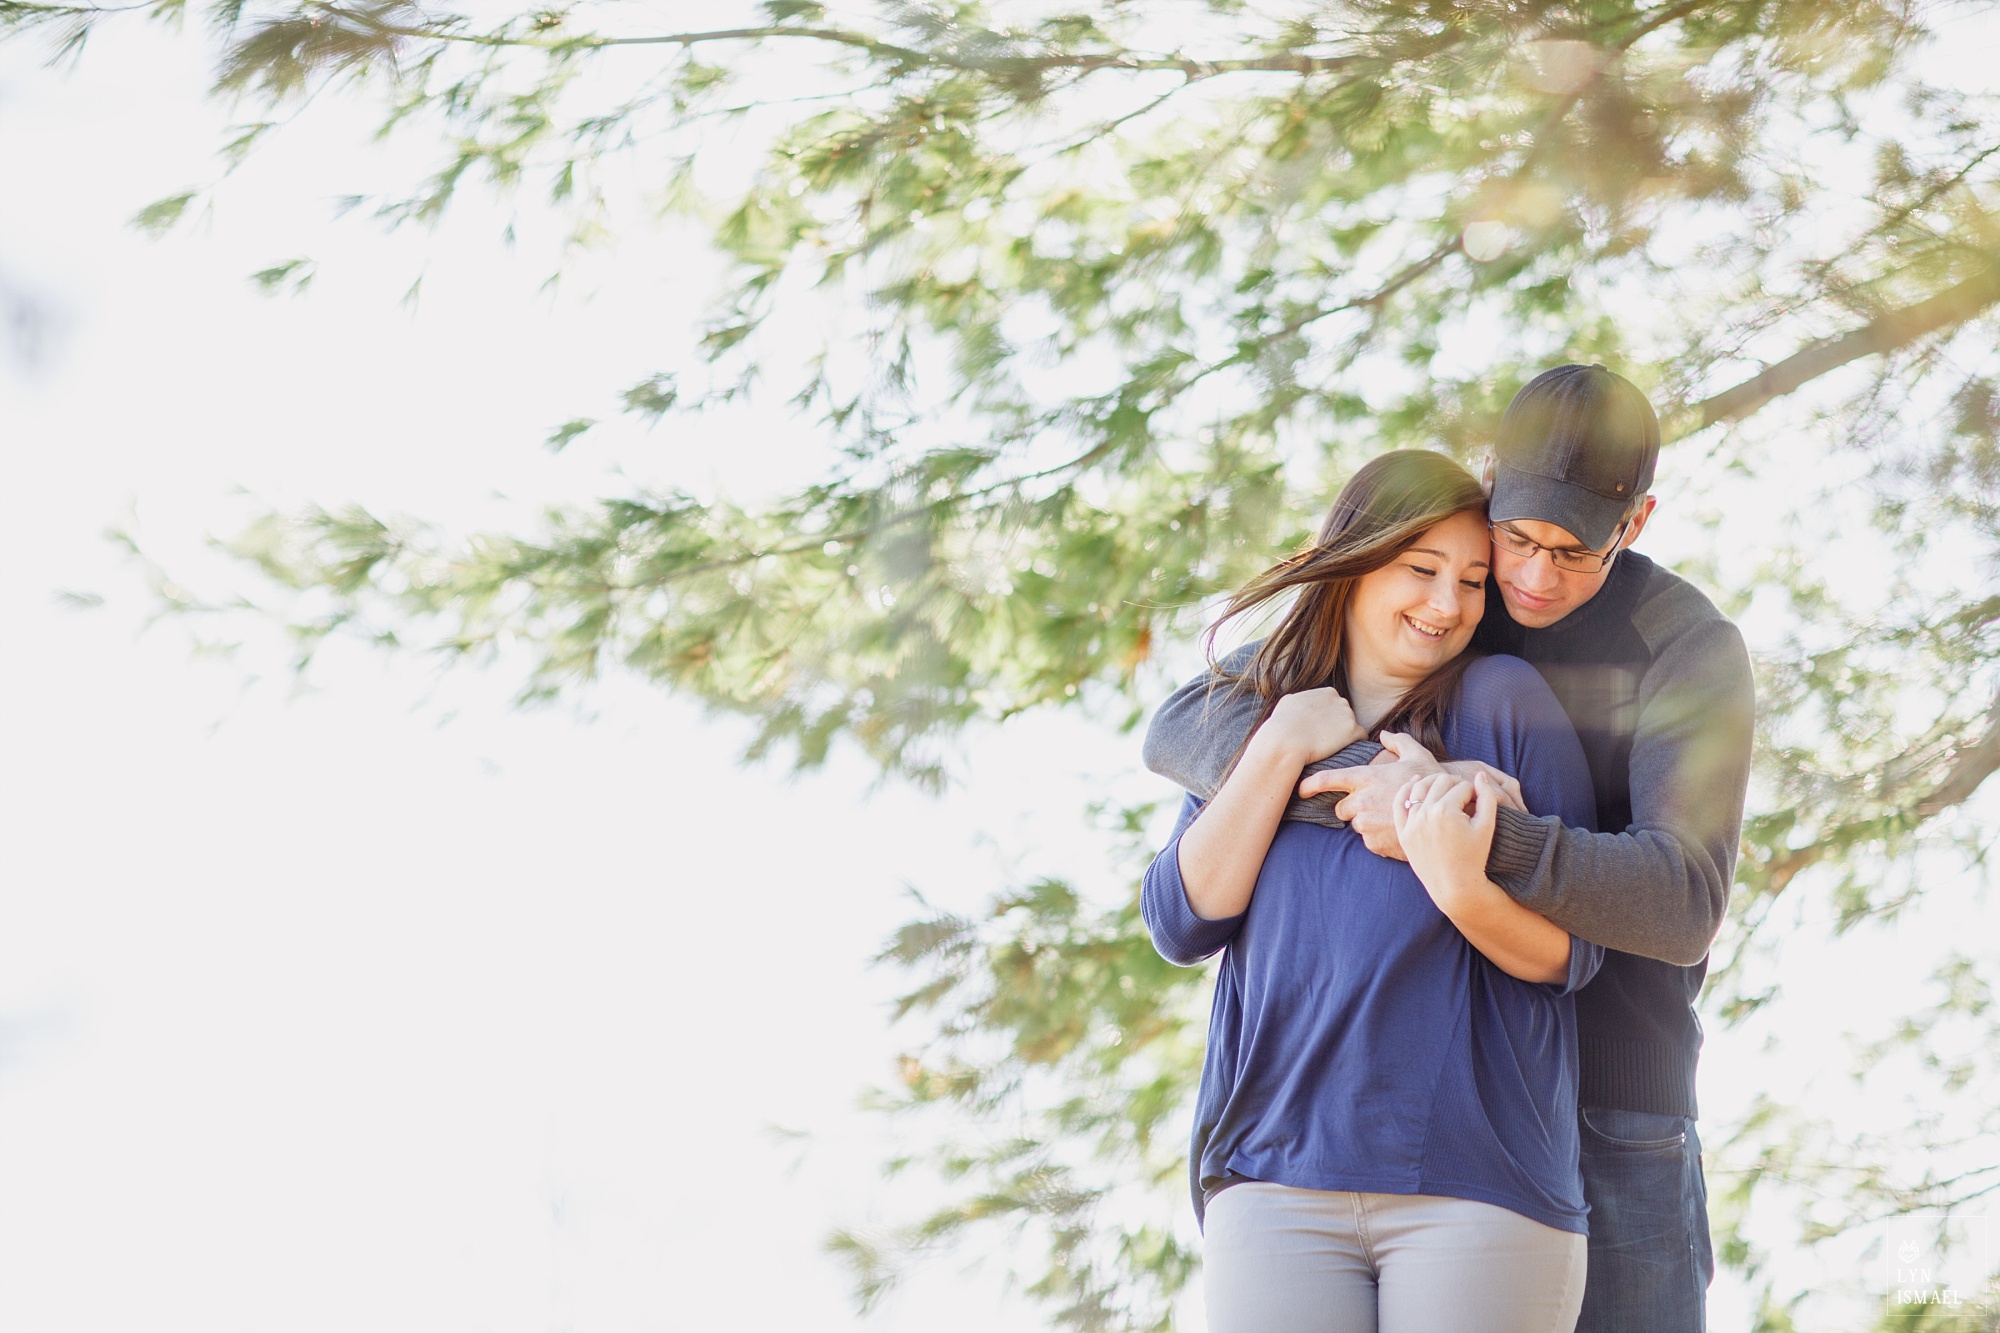 Melissa and Cory's engagement session at Snyder's Flats in Bloomindale, Ontario.